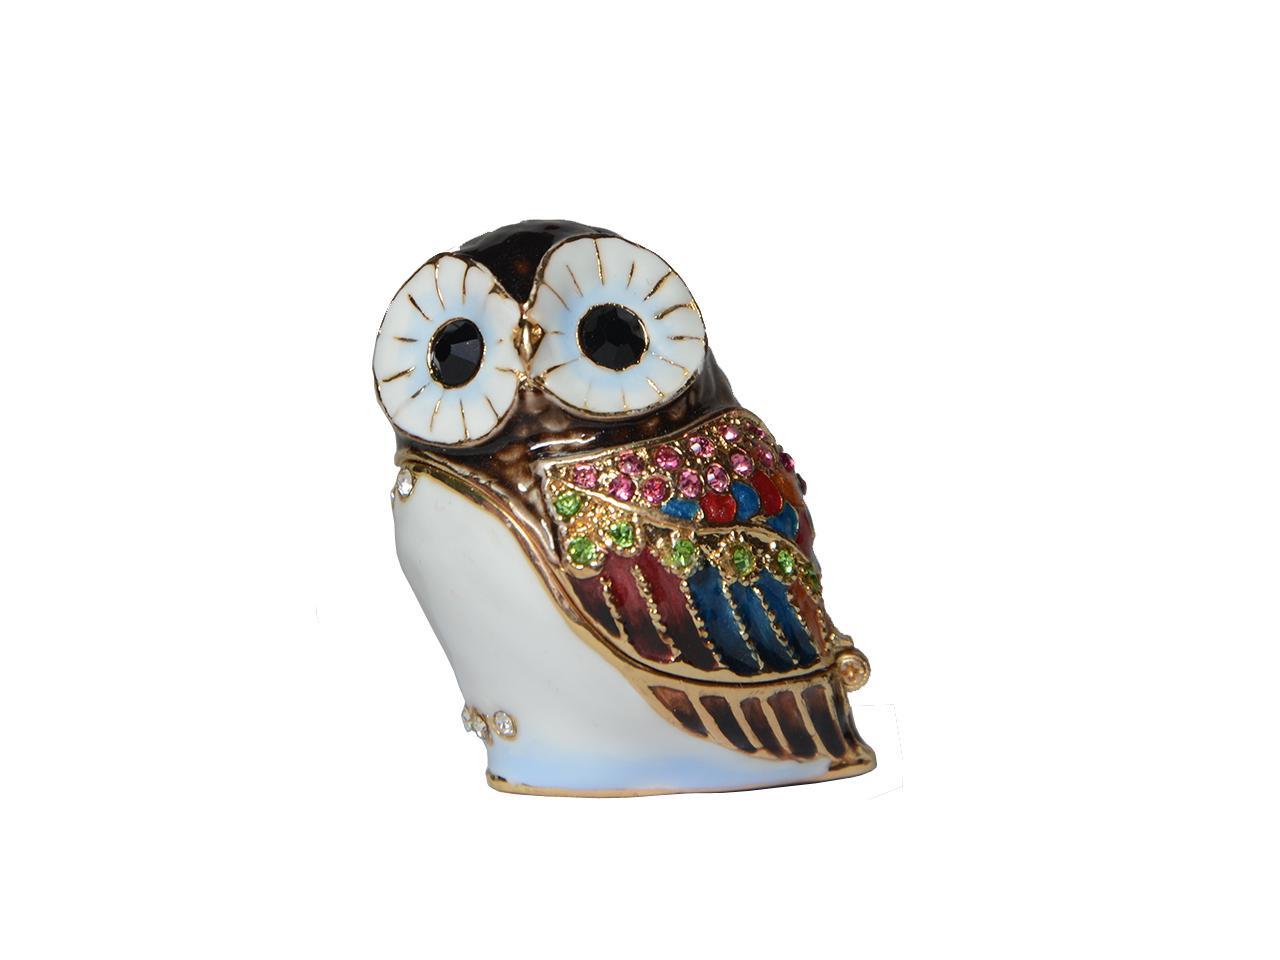 Parrot Bird Jewelry Trinket Box with Hinged Lid Enamel Jeweled Crystals Ornament 